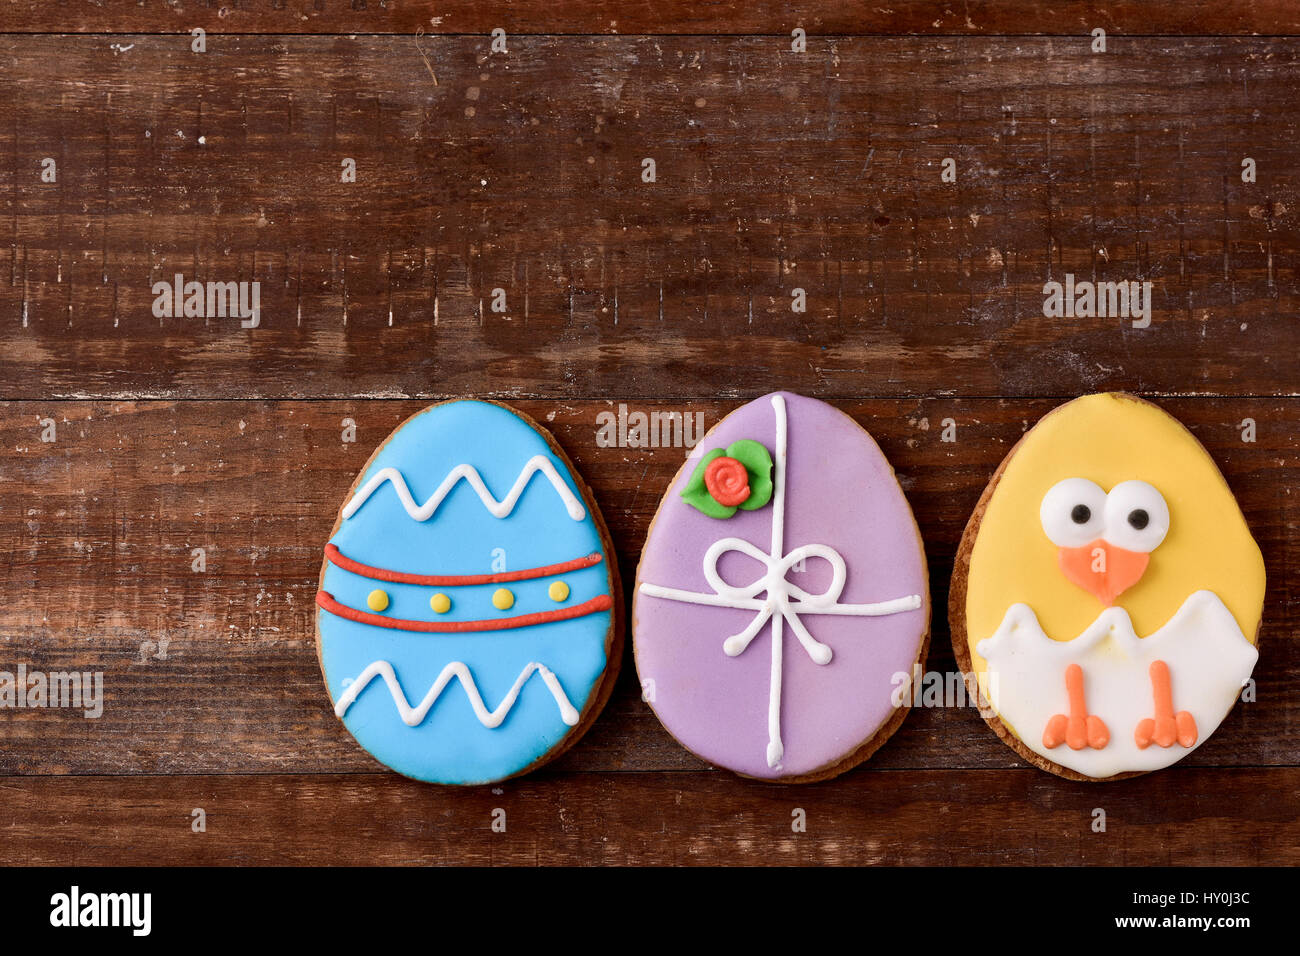 a pile of some different handmade cookies patterned as decorated easter eggs and as a funny chick against a rustic wooden background, with a blank spa Stock Photo